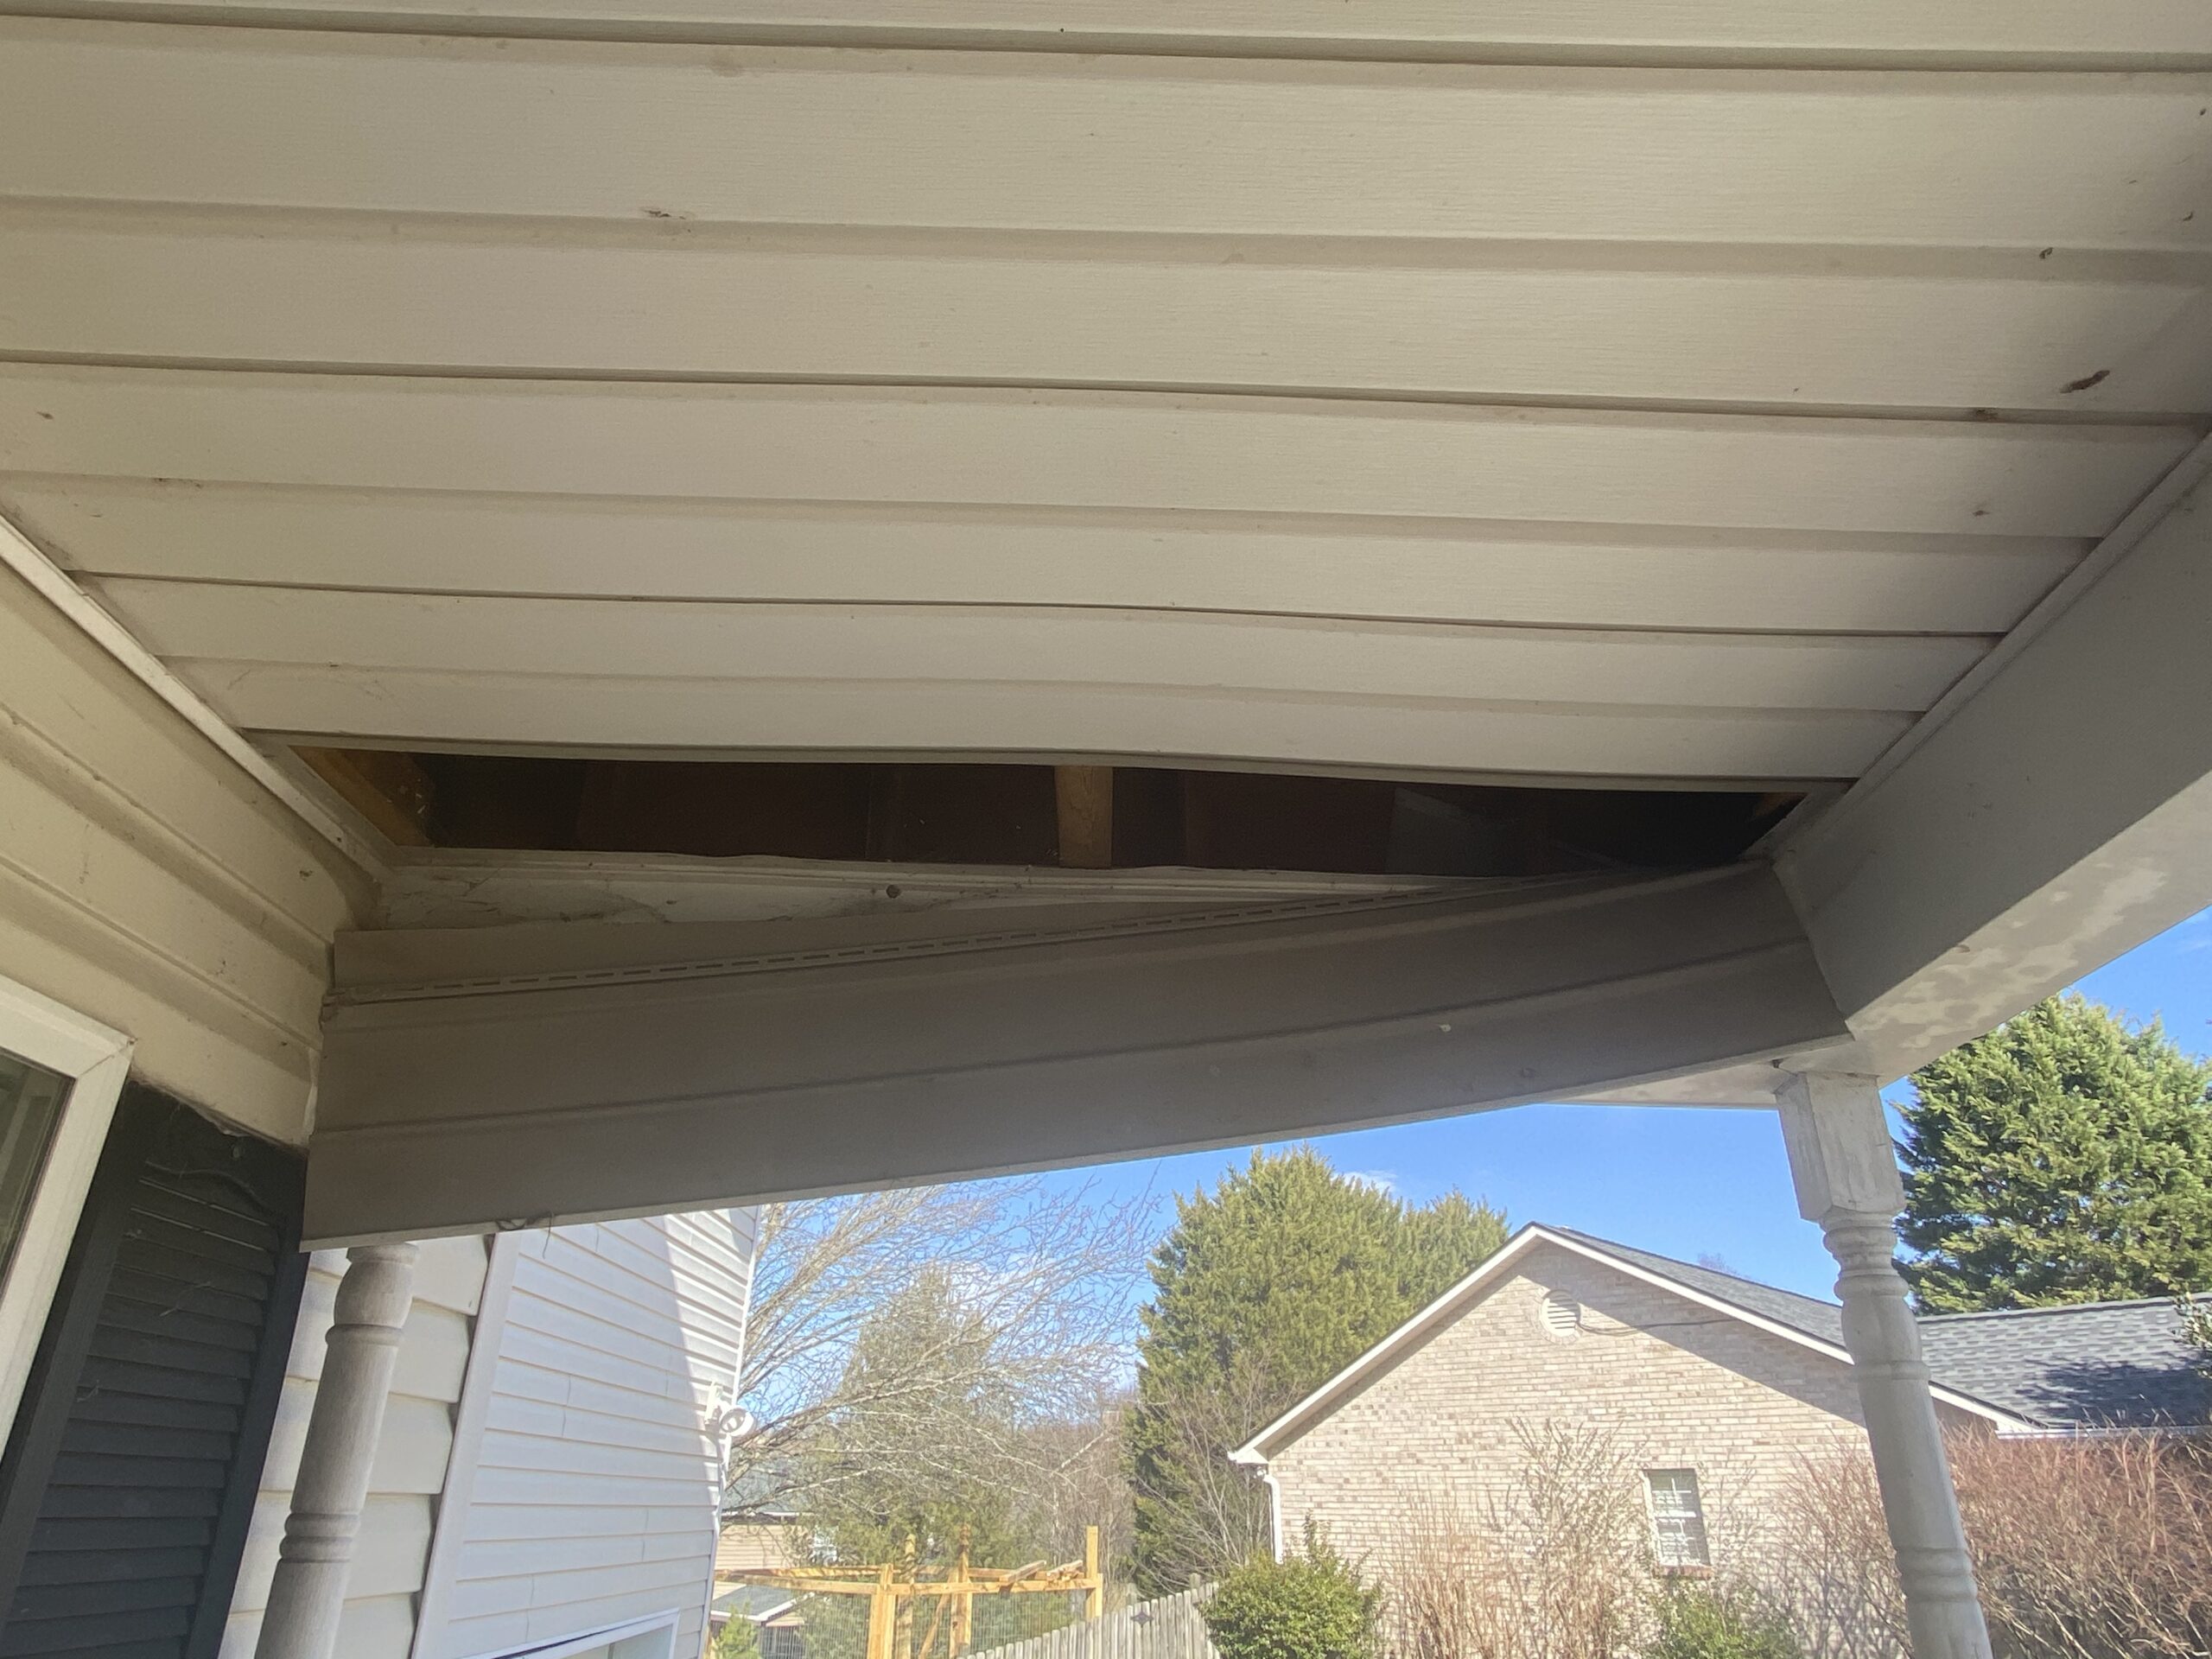 This is a four foot section of soffit that has fallen on the front porch